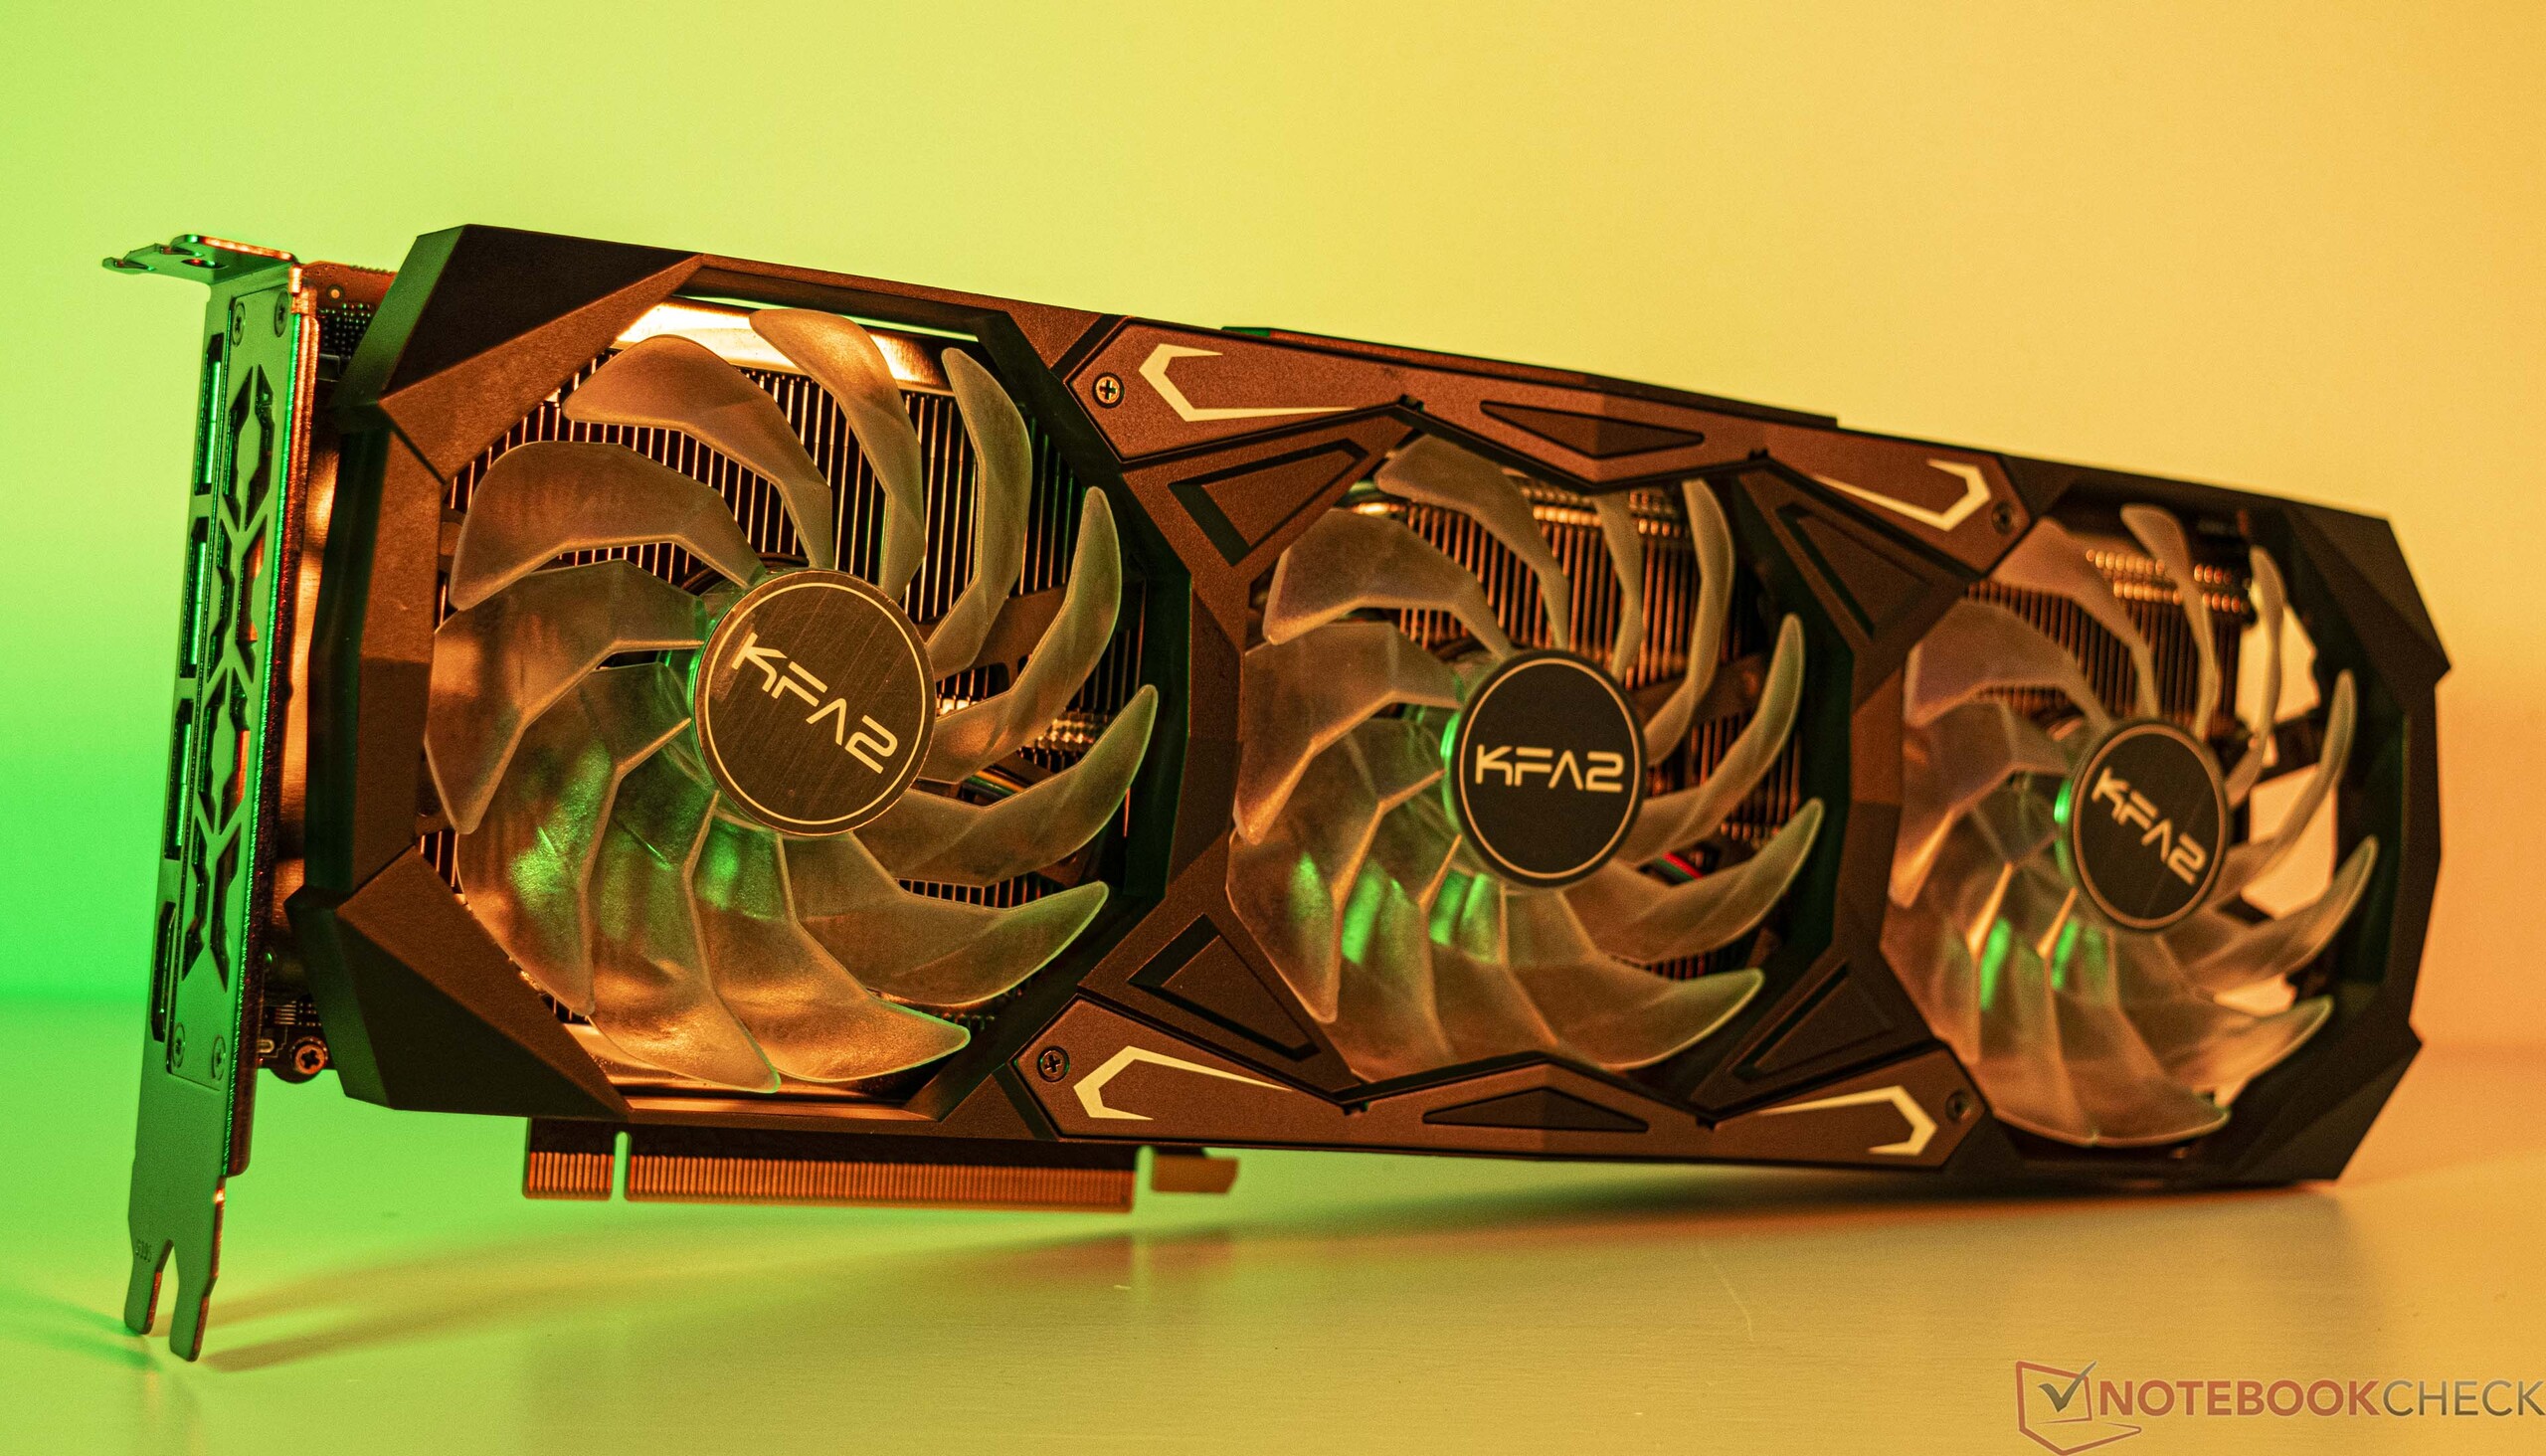 Nvidia GeForce RTX 2080 Ti in large efficiency test from 140 to 340 watts, igorsLAB